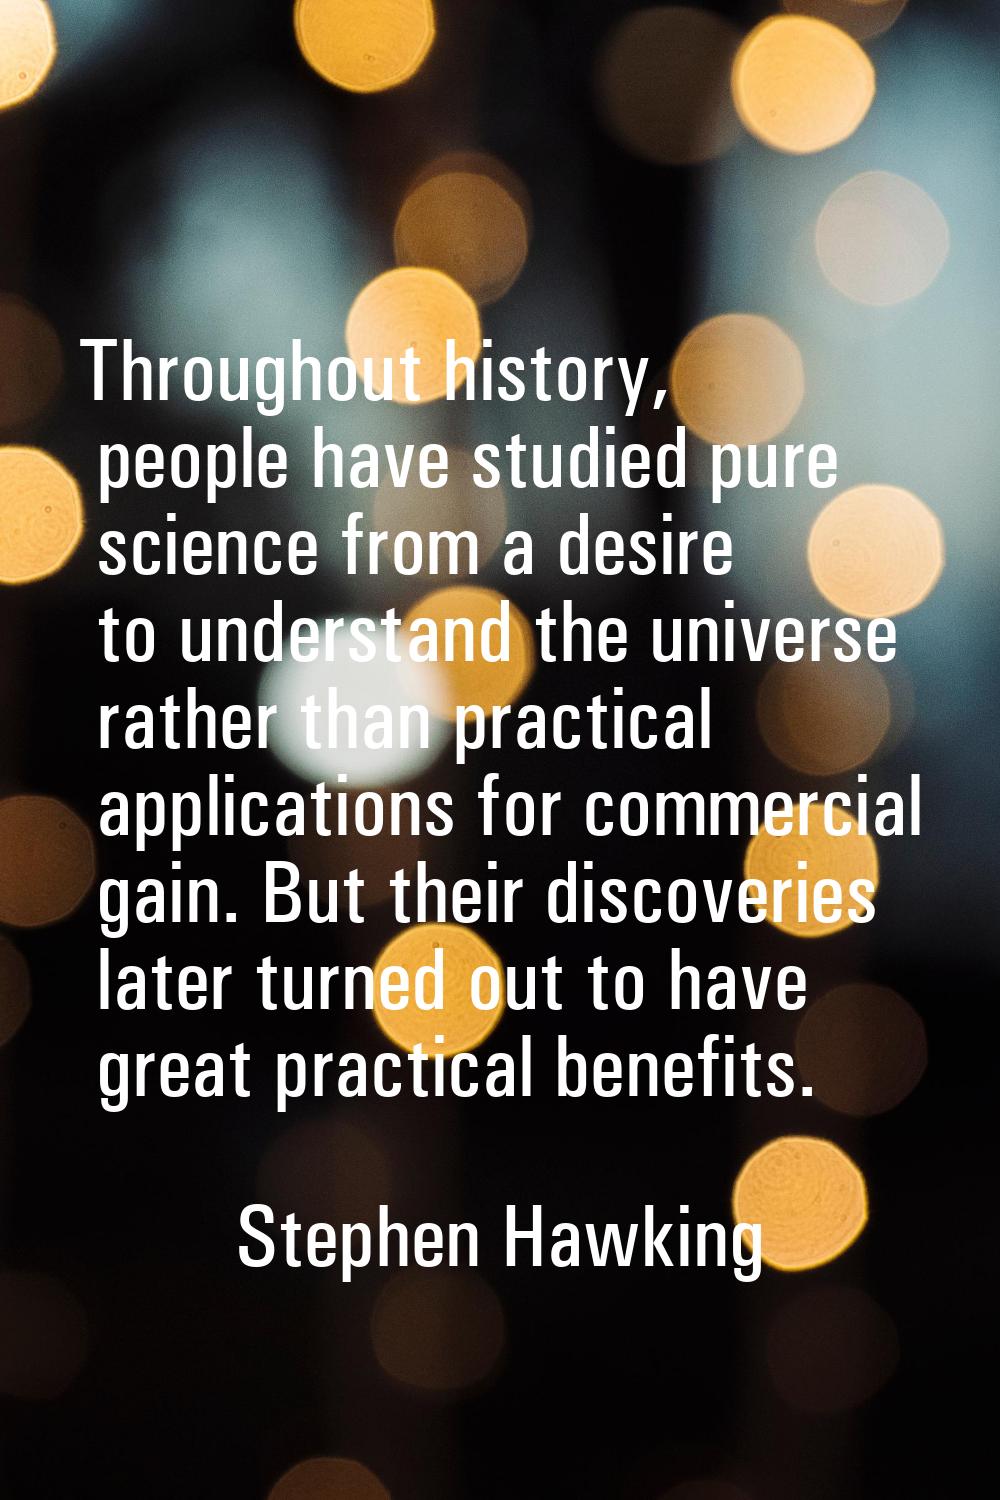 Throughout history, people have studied pure science from a desire to understand the universe rathe